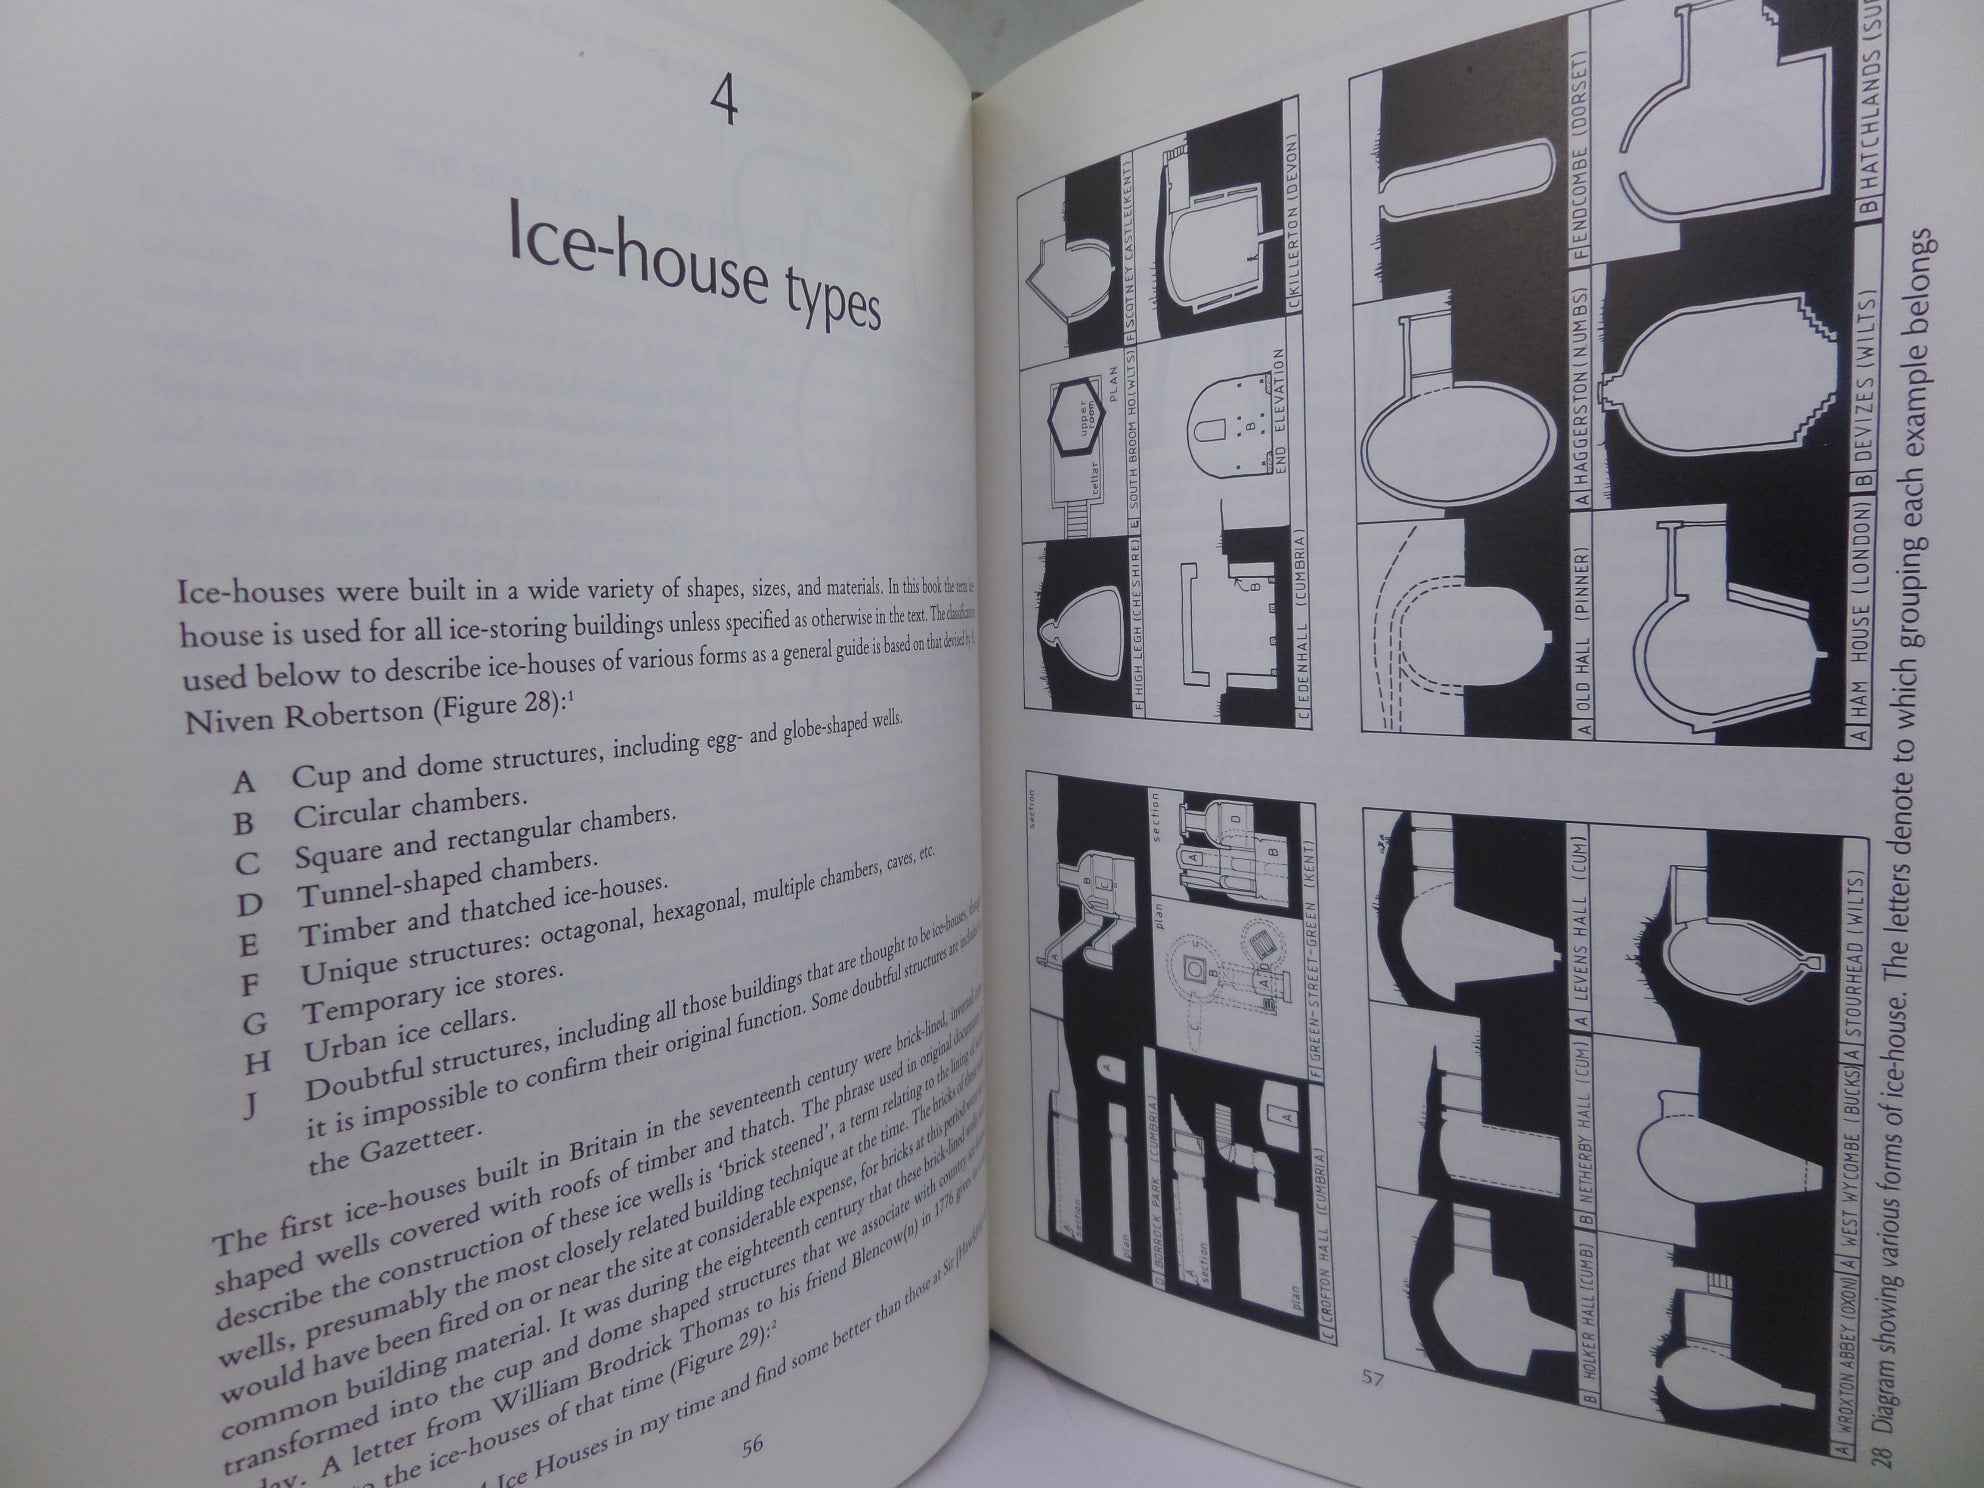 THE ICE-HOUSES OF BRITAIN BY SYLVIA BEAMON AND SUSAN ROAF 1990 HARDCOVER